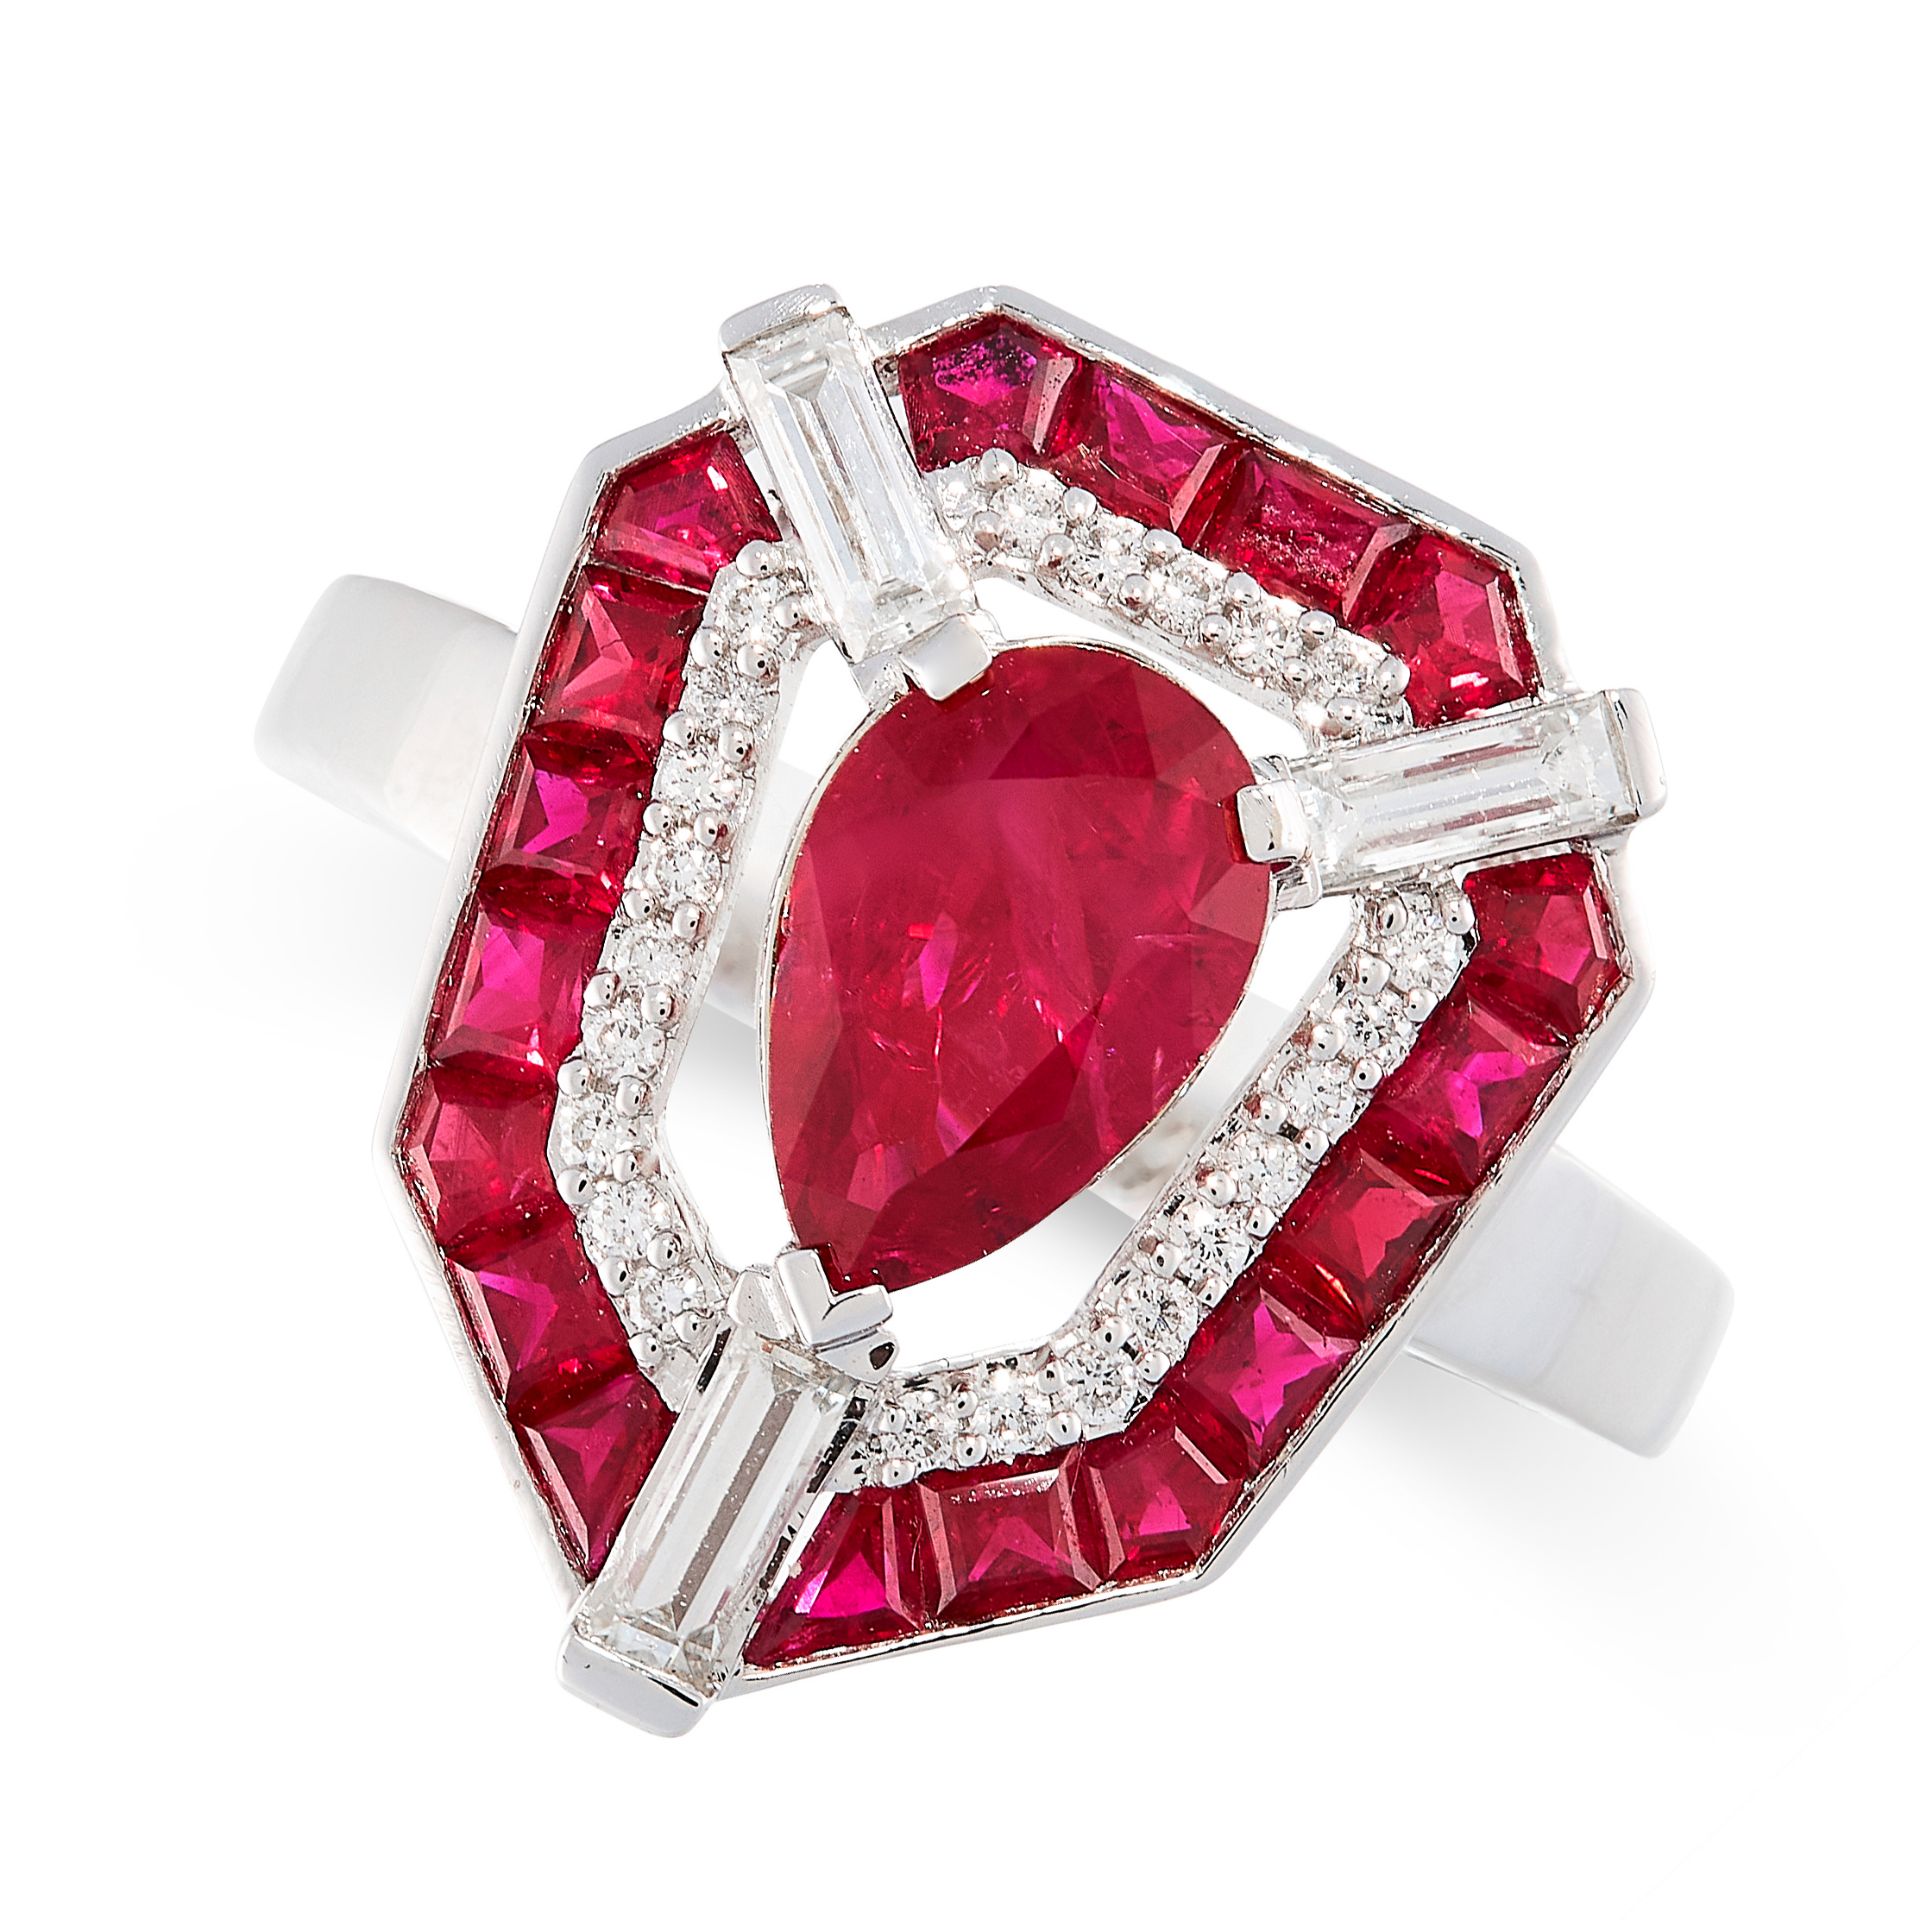 UNHEATED RUBY AND DIAMOND RING set with a pear cut ruby of 1.40 carats in a border of round cut